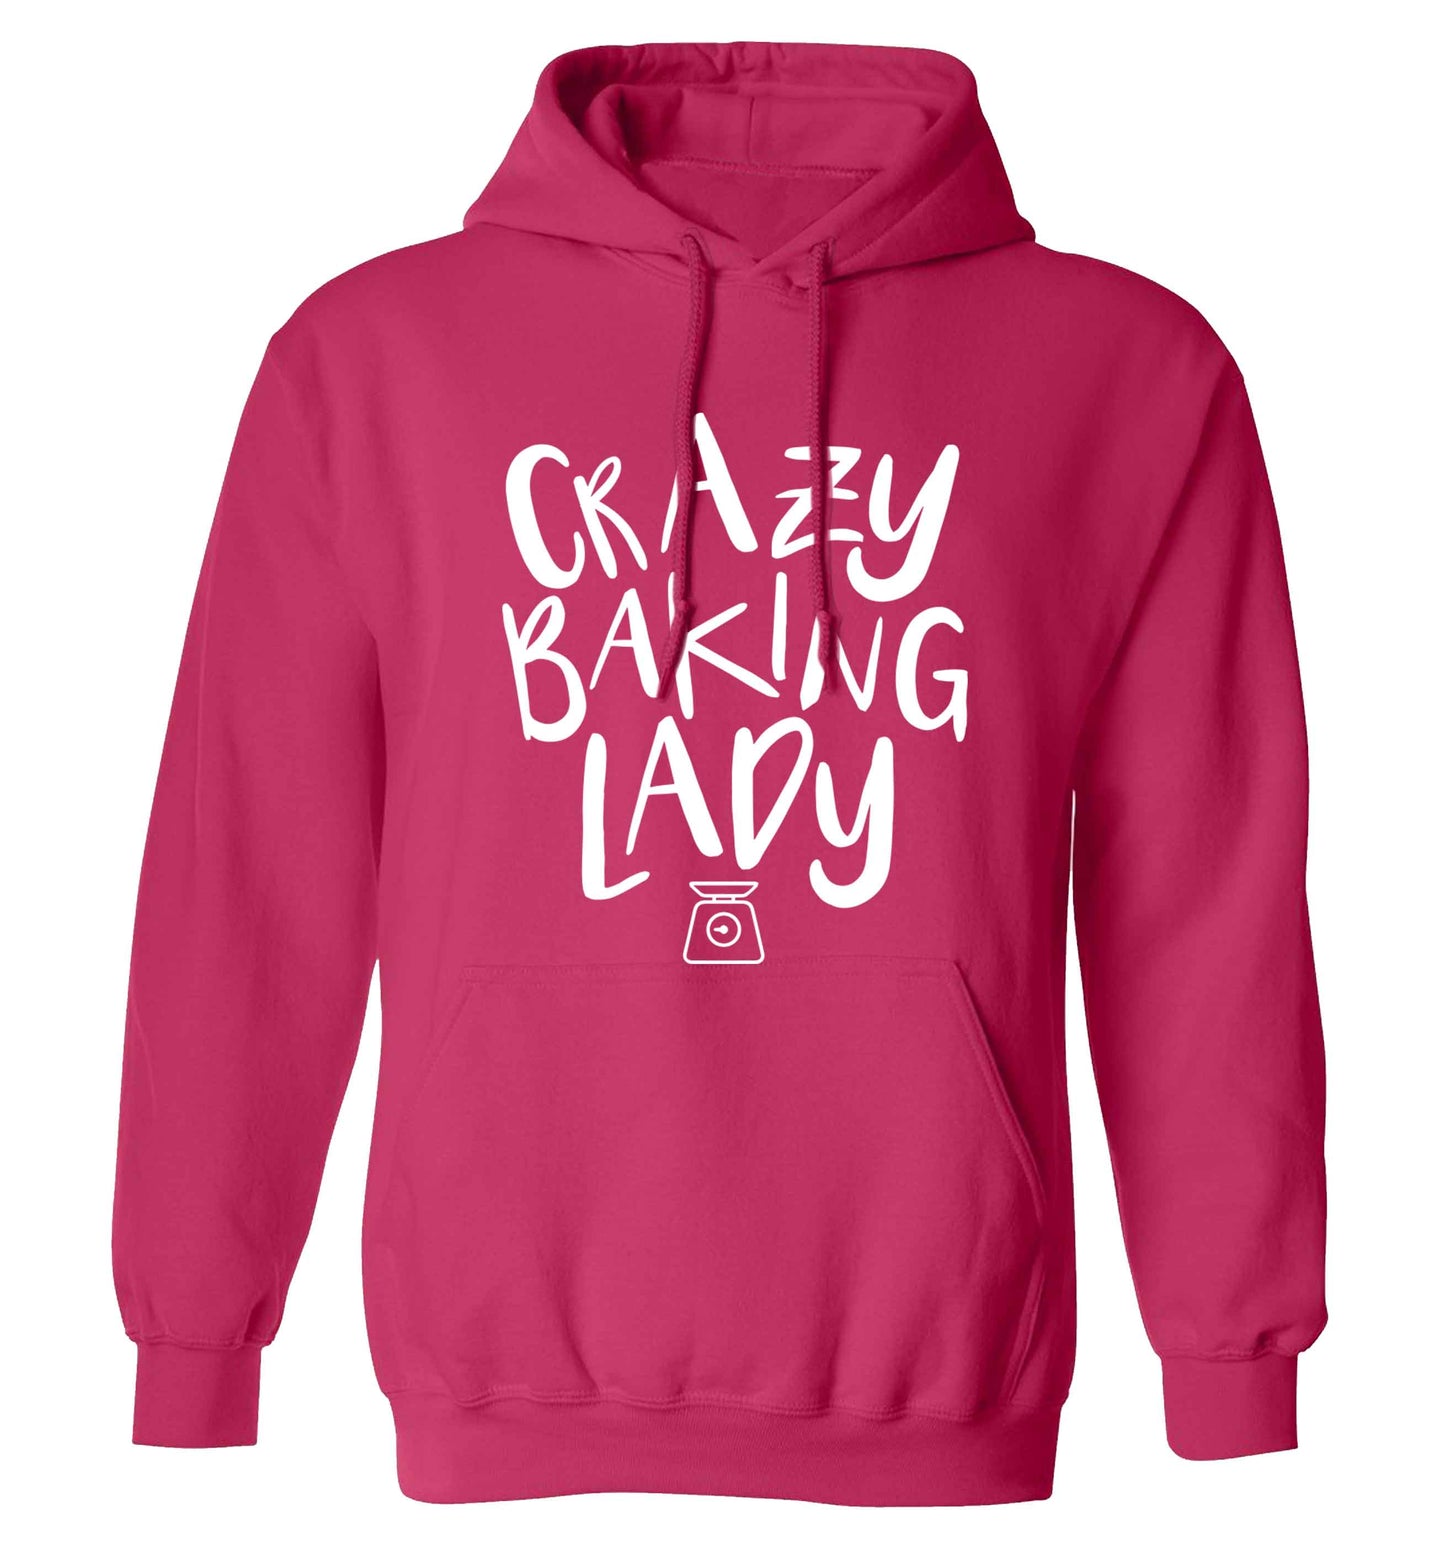 Crazy baking lady adults unisex pink hoodie 2XL